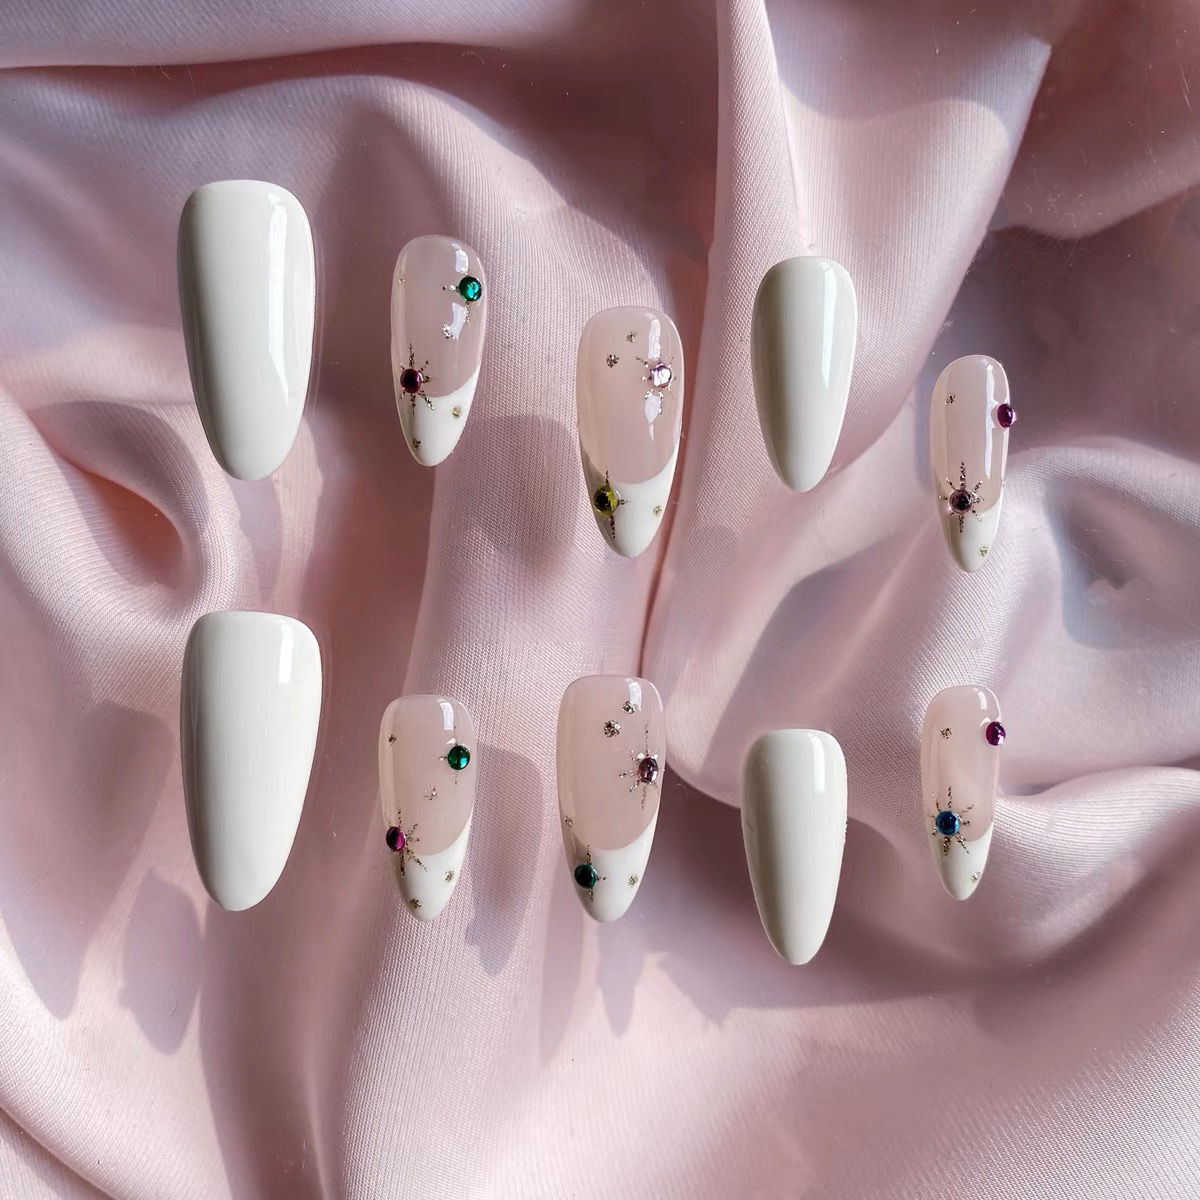 Snowy Rainbow Handcrafted Custom Almond French-style Wearable Nails False Nails from SHOPQAQ